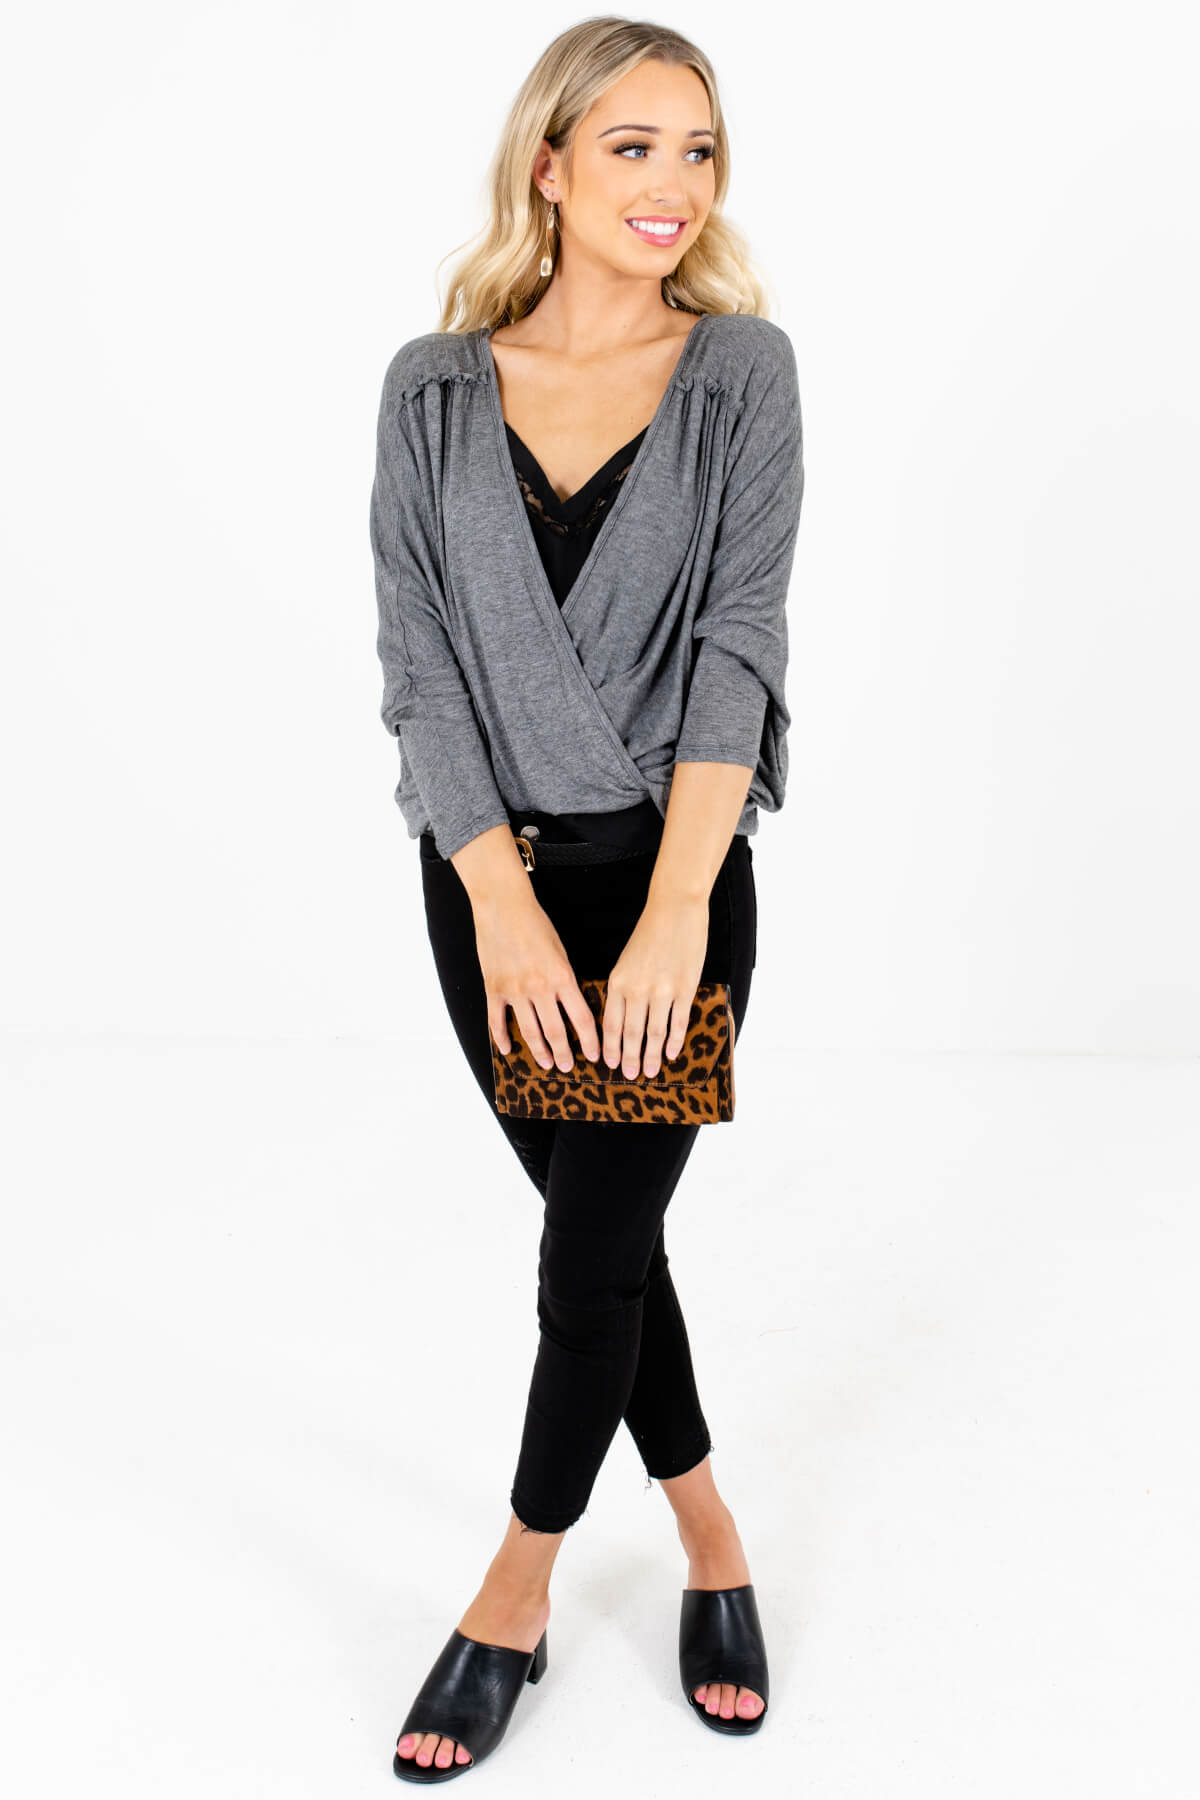 Women's Heather Gray Oversized Relaxed Fit Boutique Tops